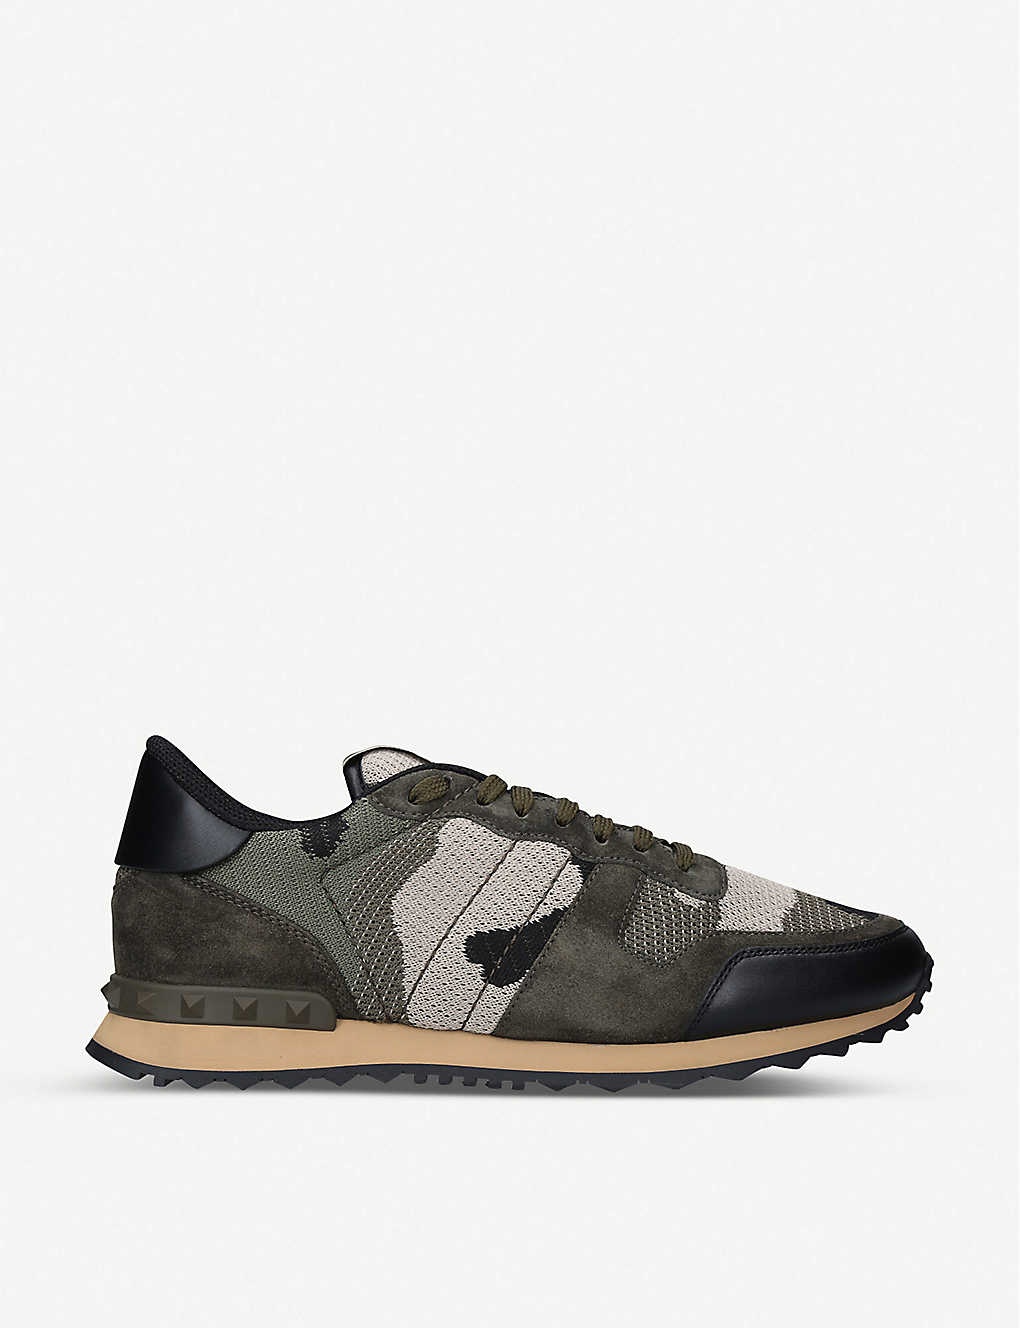 Full leather camouflage trainers - 1